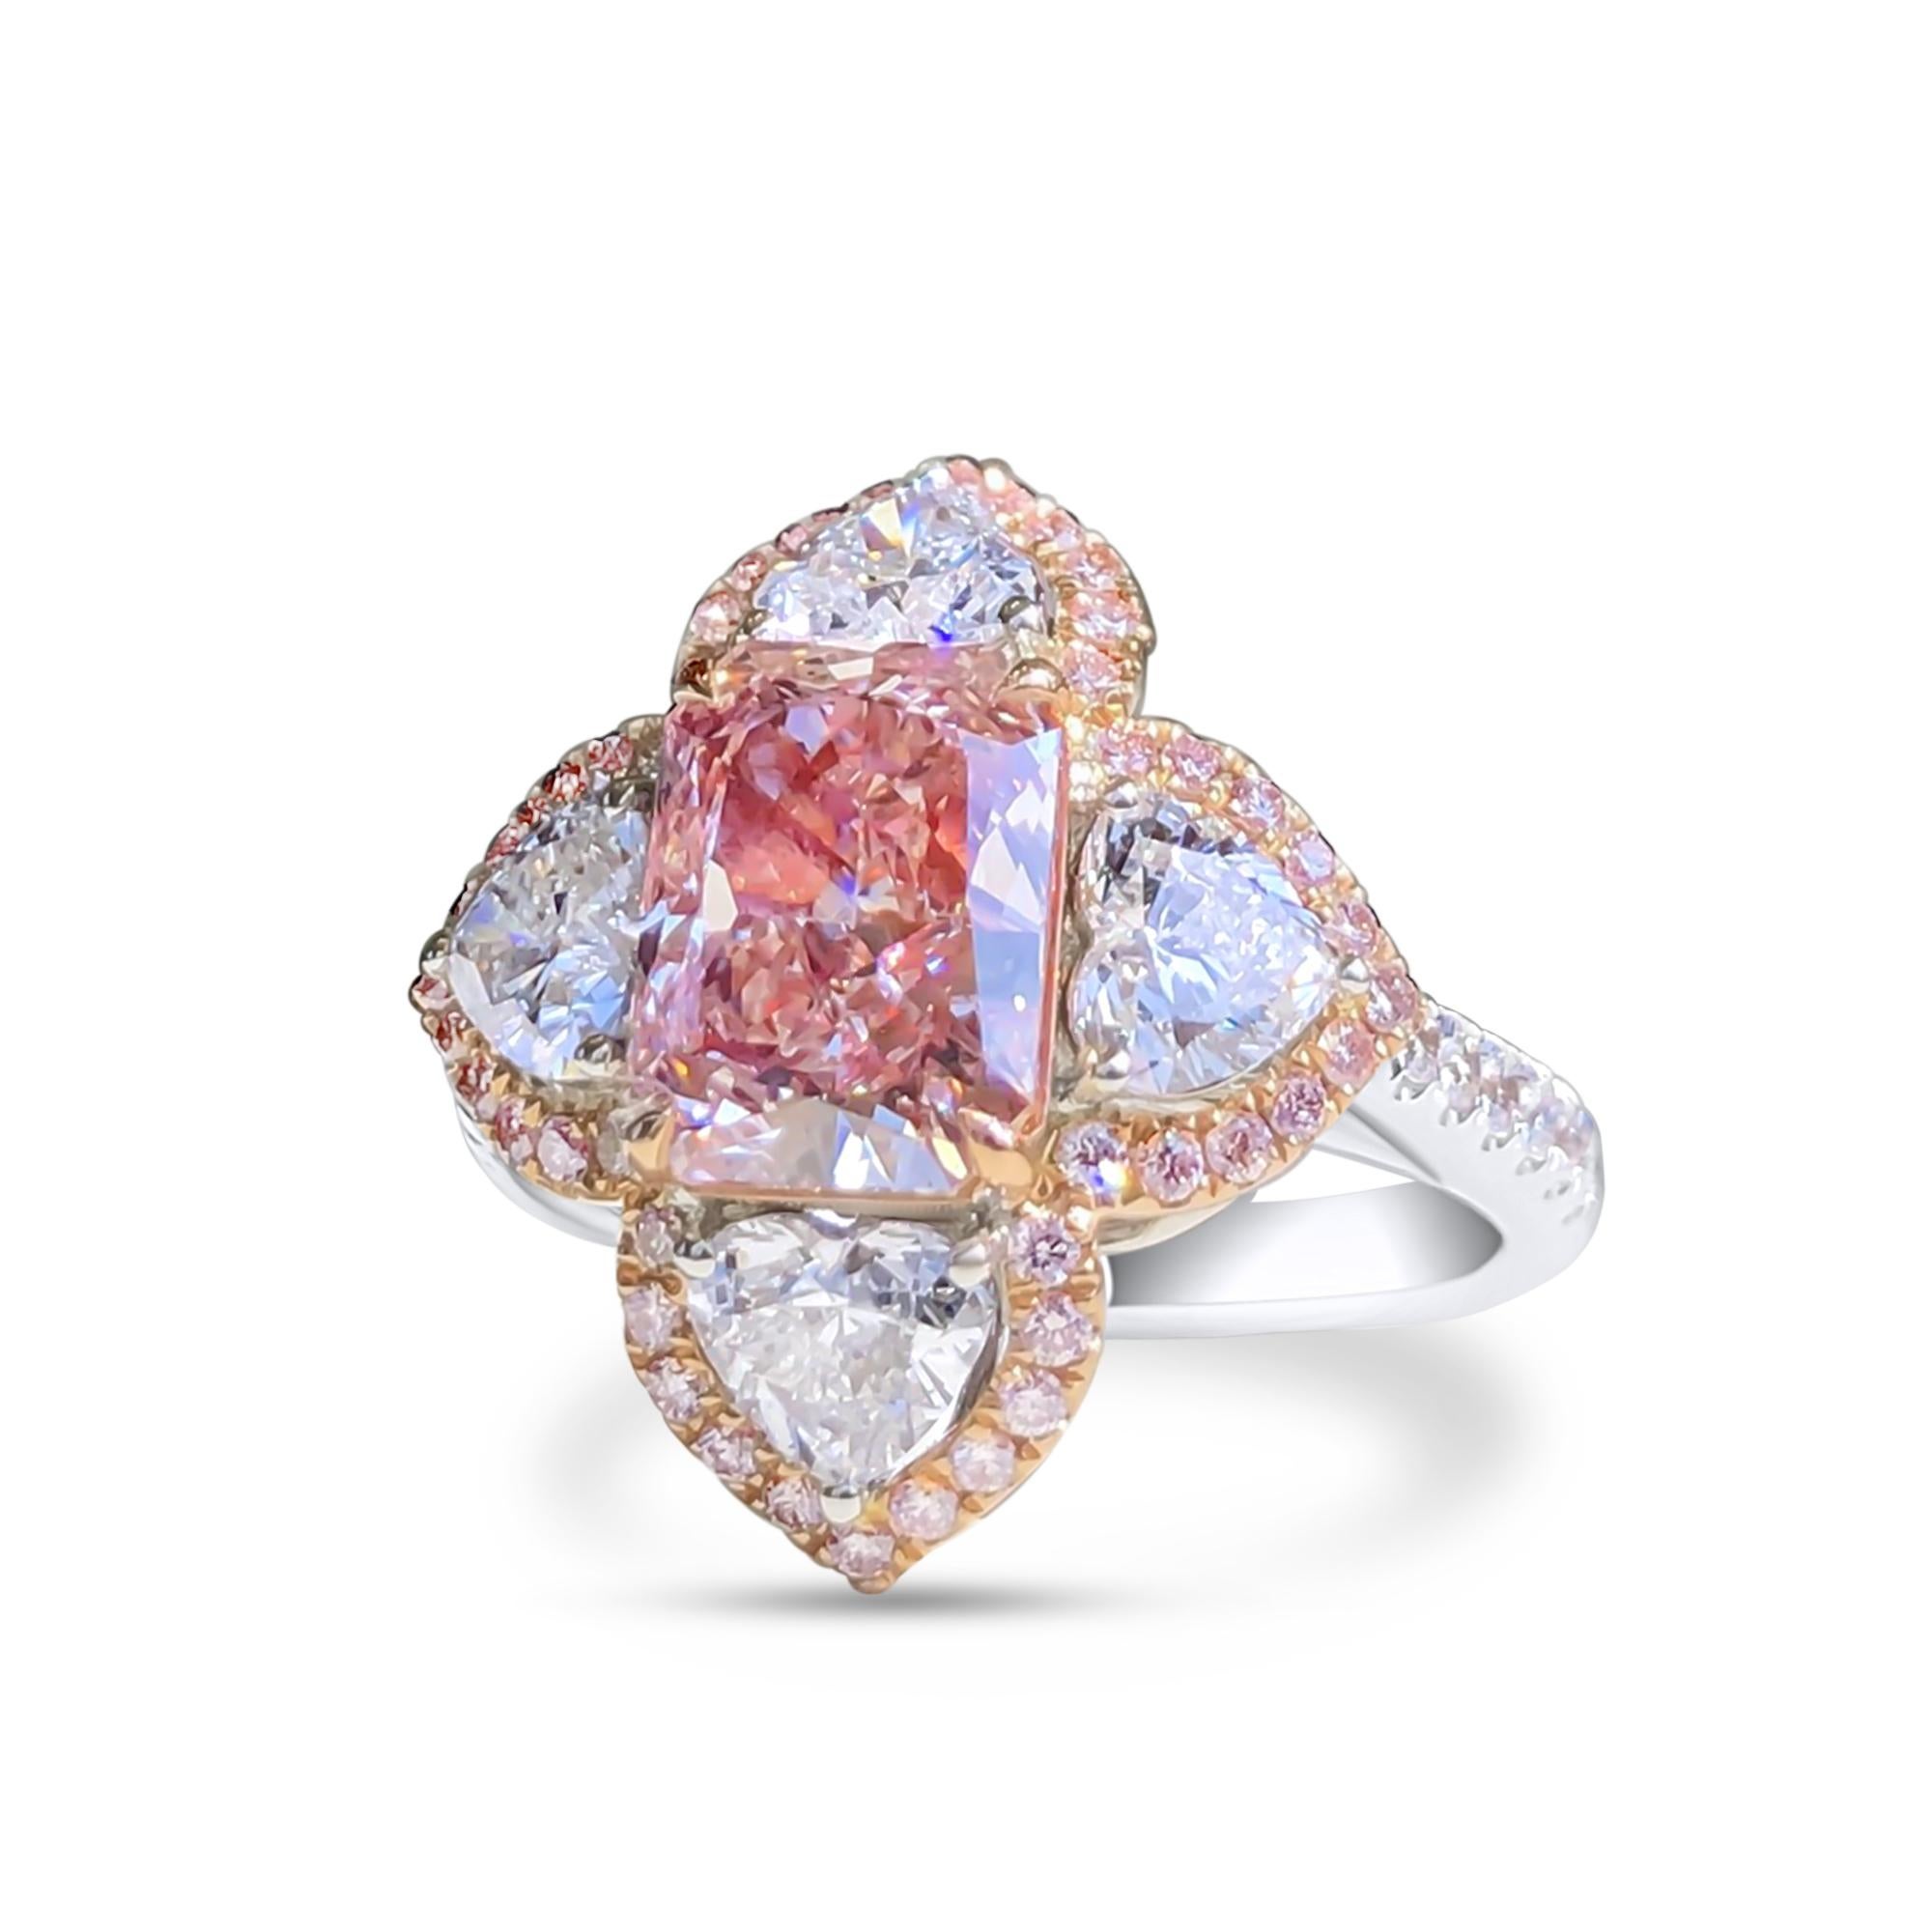 We invite you to discover this magnificent cocktail ring set with a GIA certified rectangular cut pink diamond of 2.18 carats enhanced with 4 heart cut colorless diamonds weighing approximately 0.30 carats each GIA certified.
The ideal ring to